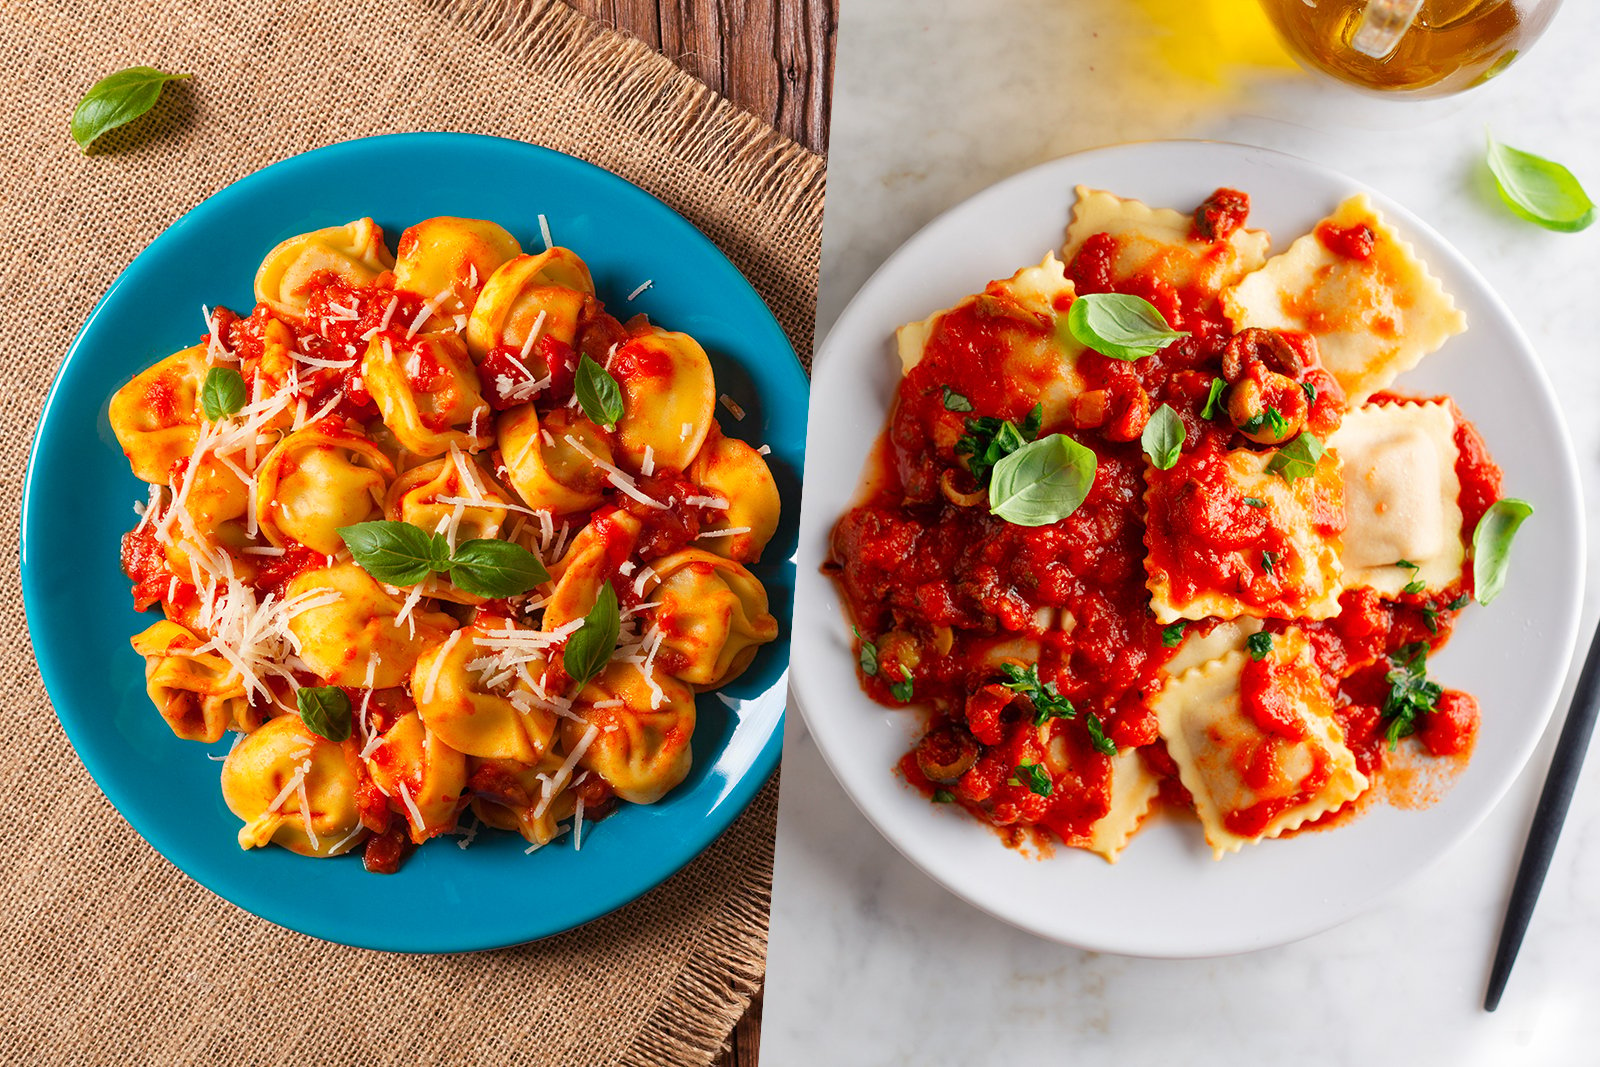 Side by side shots of tortellini and ravioli dishes from overhead 